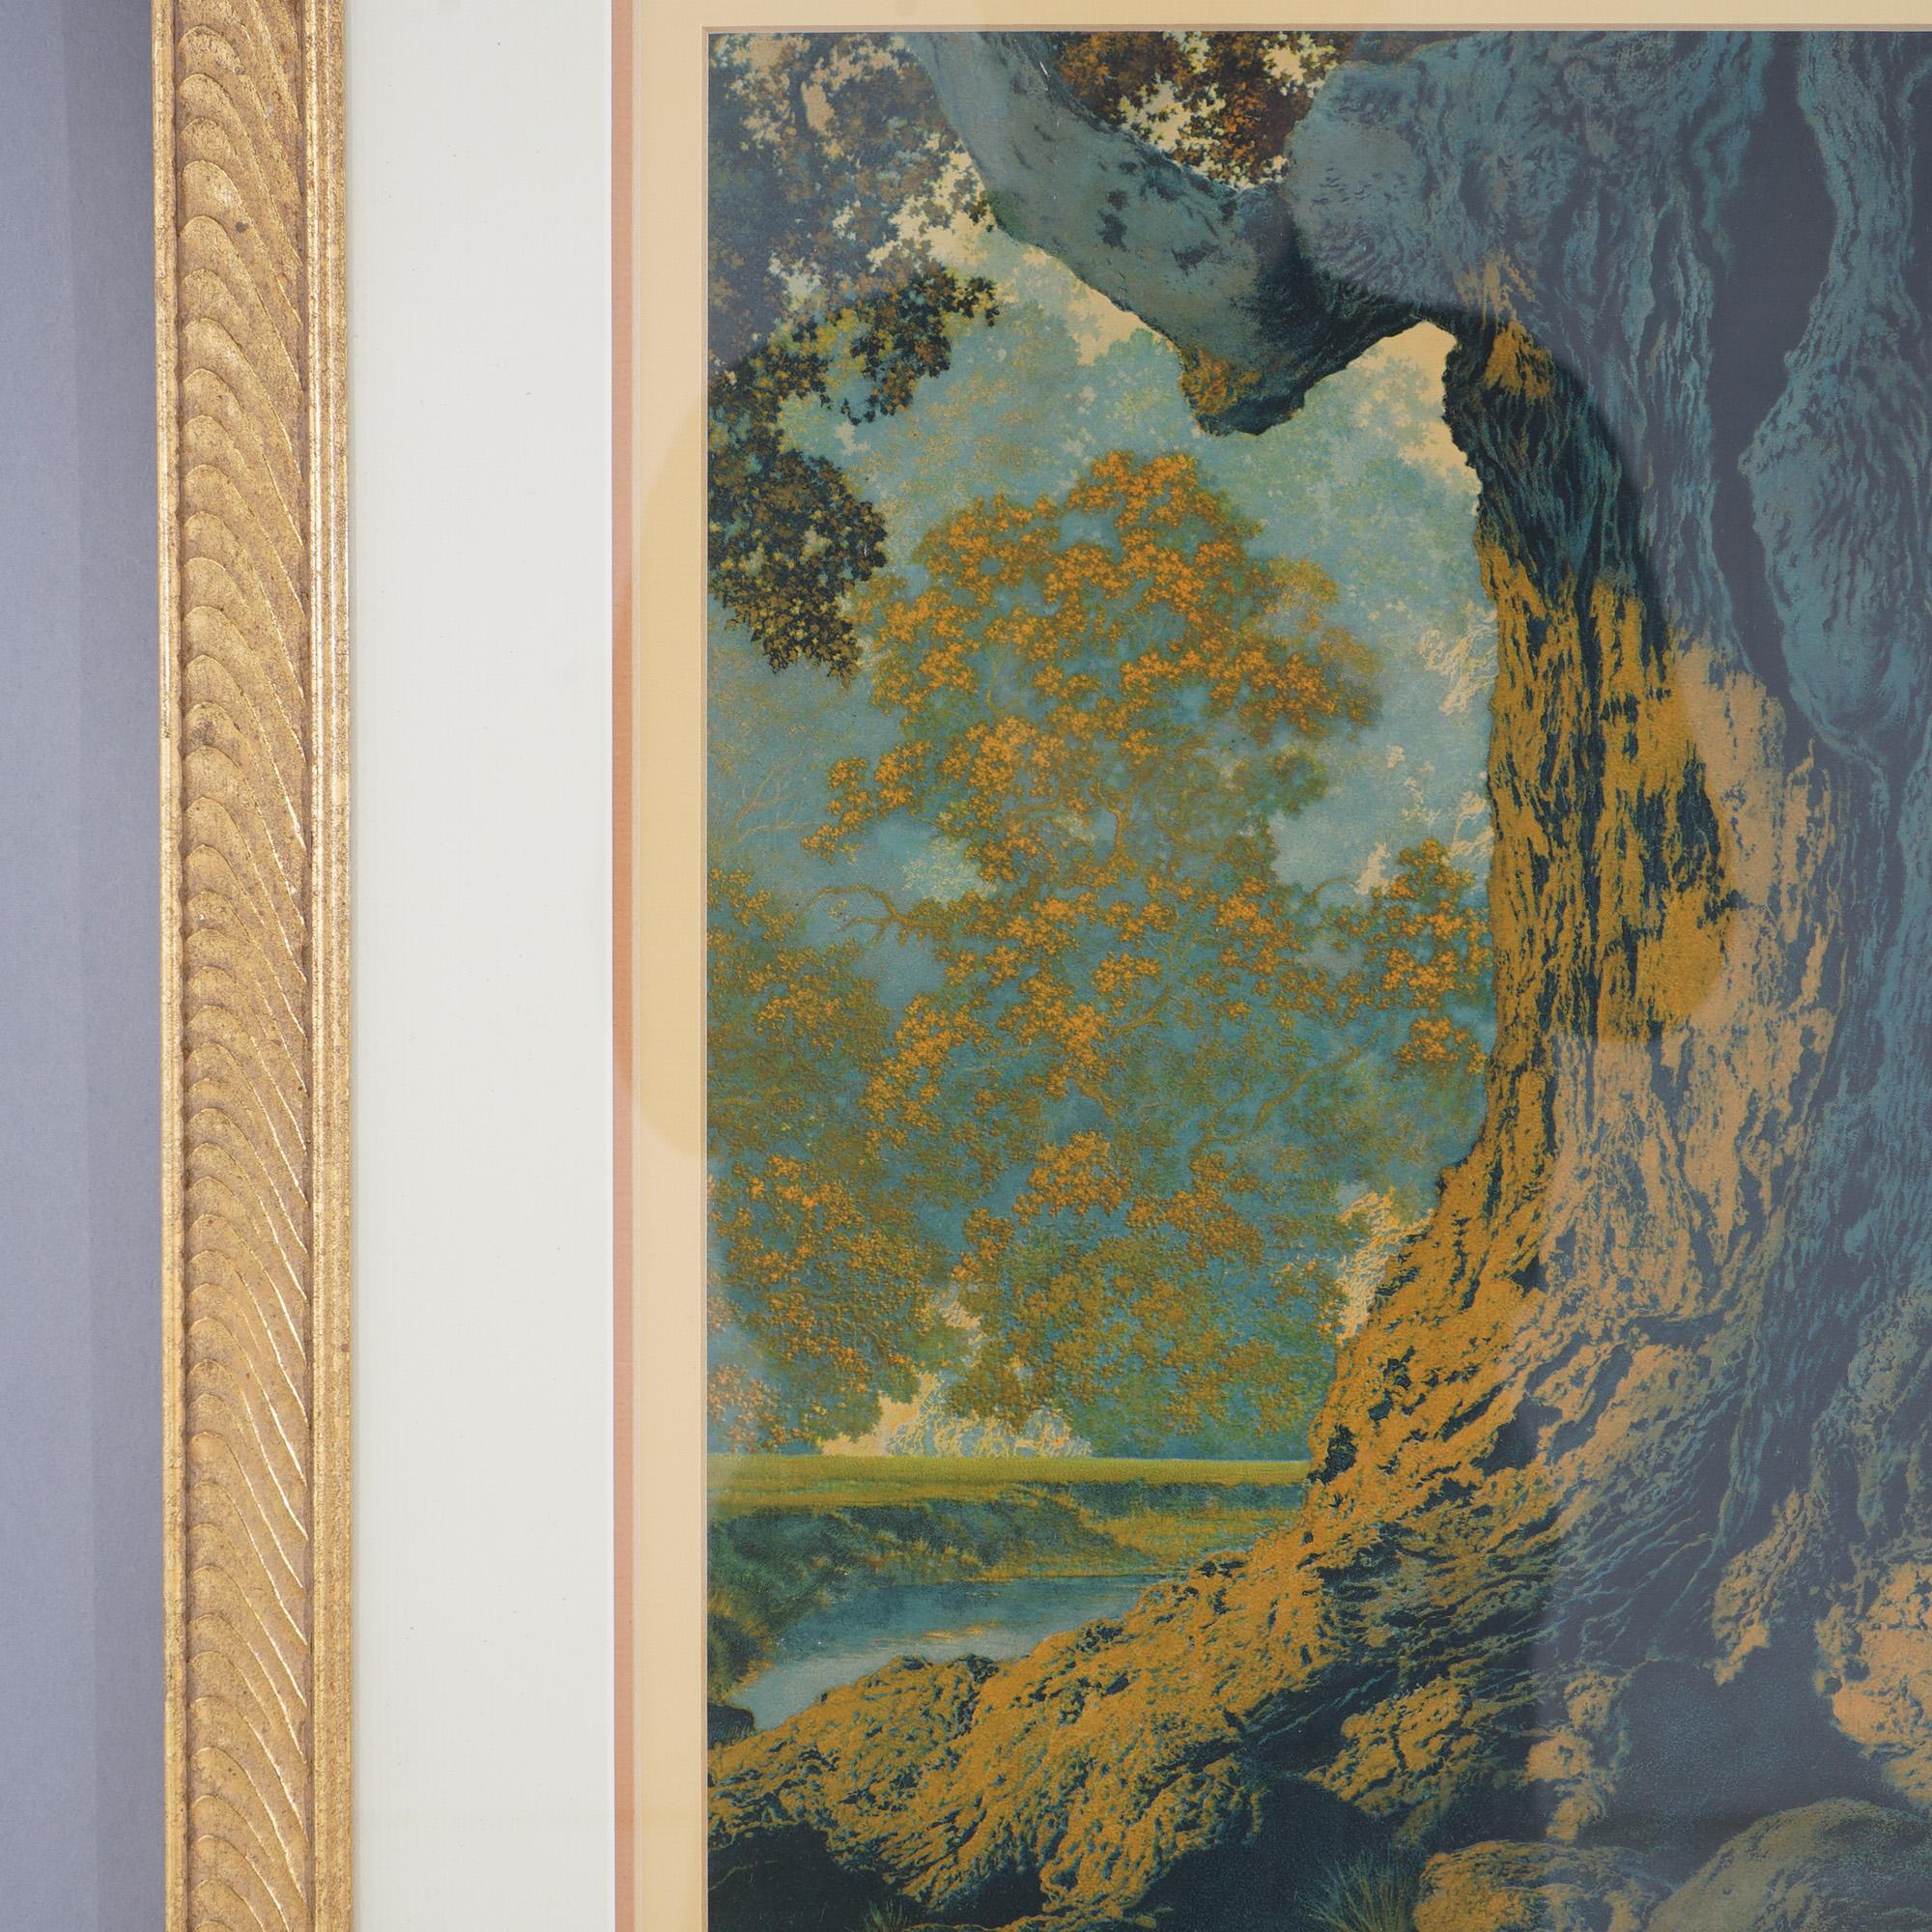 Paper Maxfield Parrish Art Deco Dreaming Large Size Print, Framed, Circa 1920 For Sale